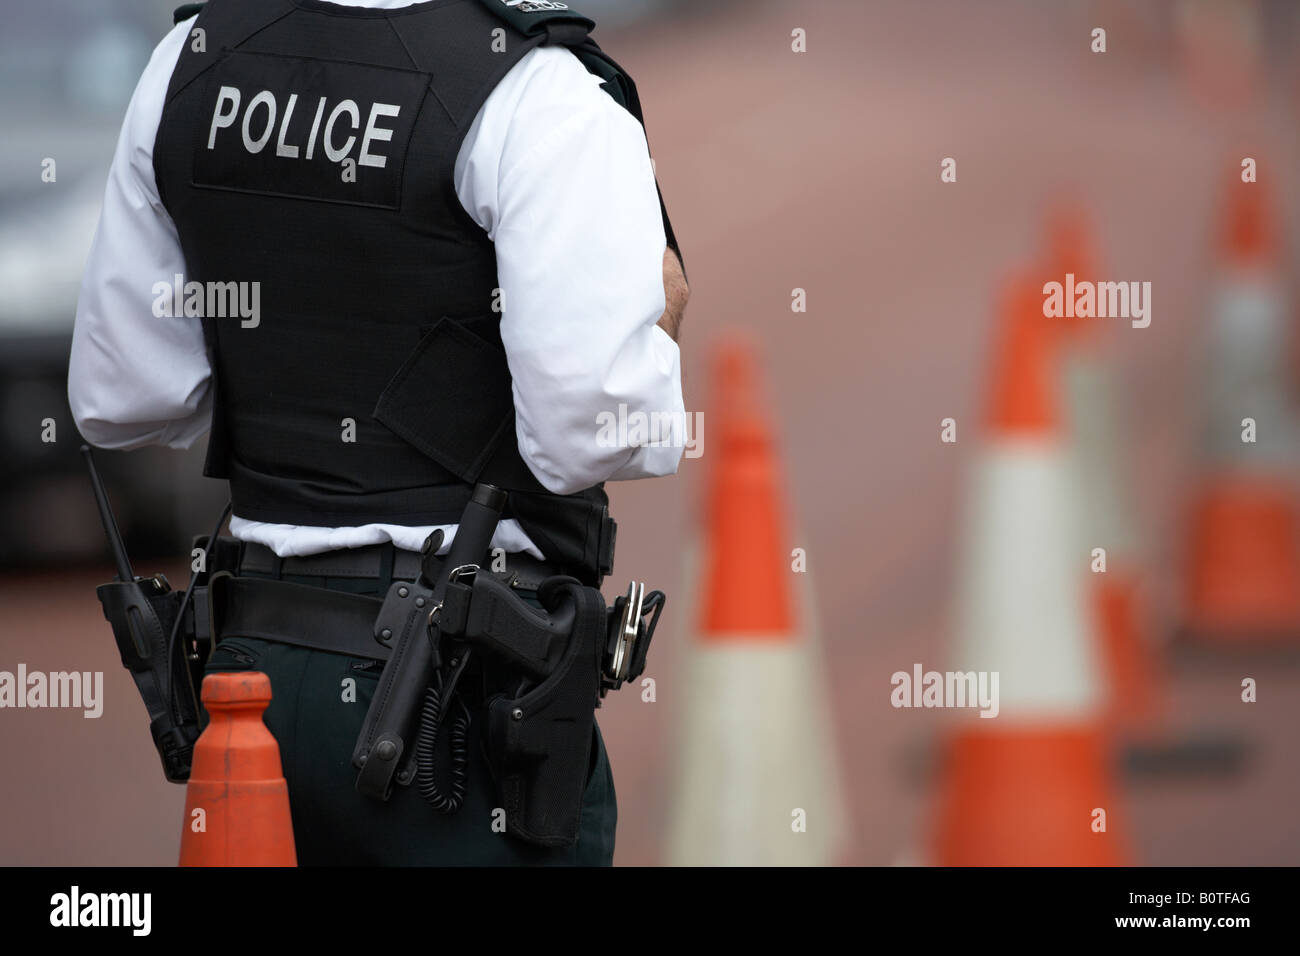 PSNI police service northern ireland officer sergeant standing watching traffic in coned off roadside area ni Stock Photo